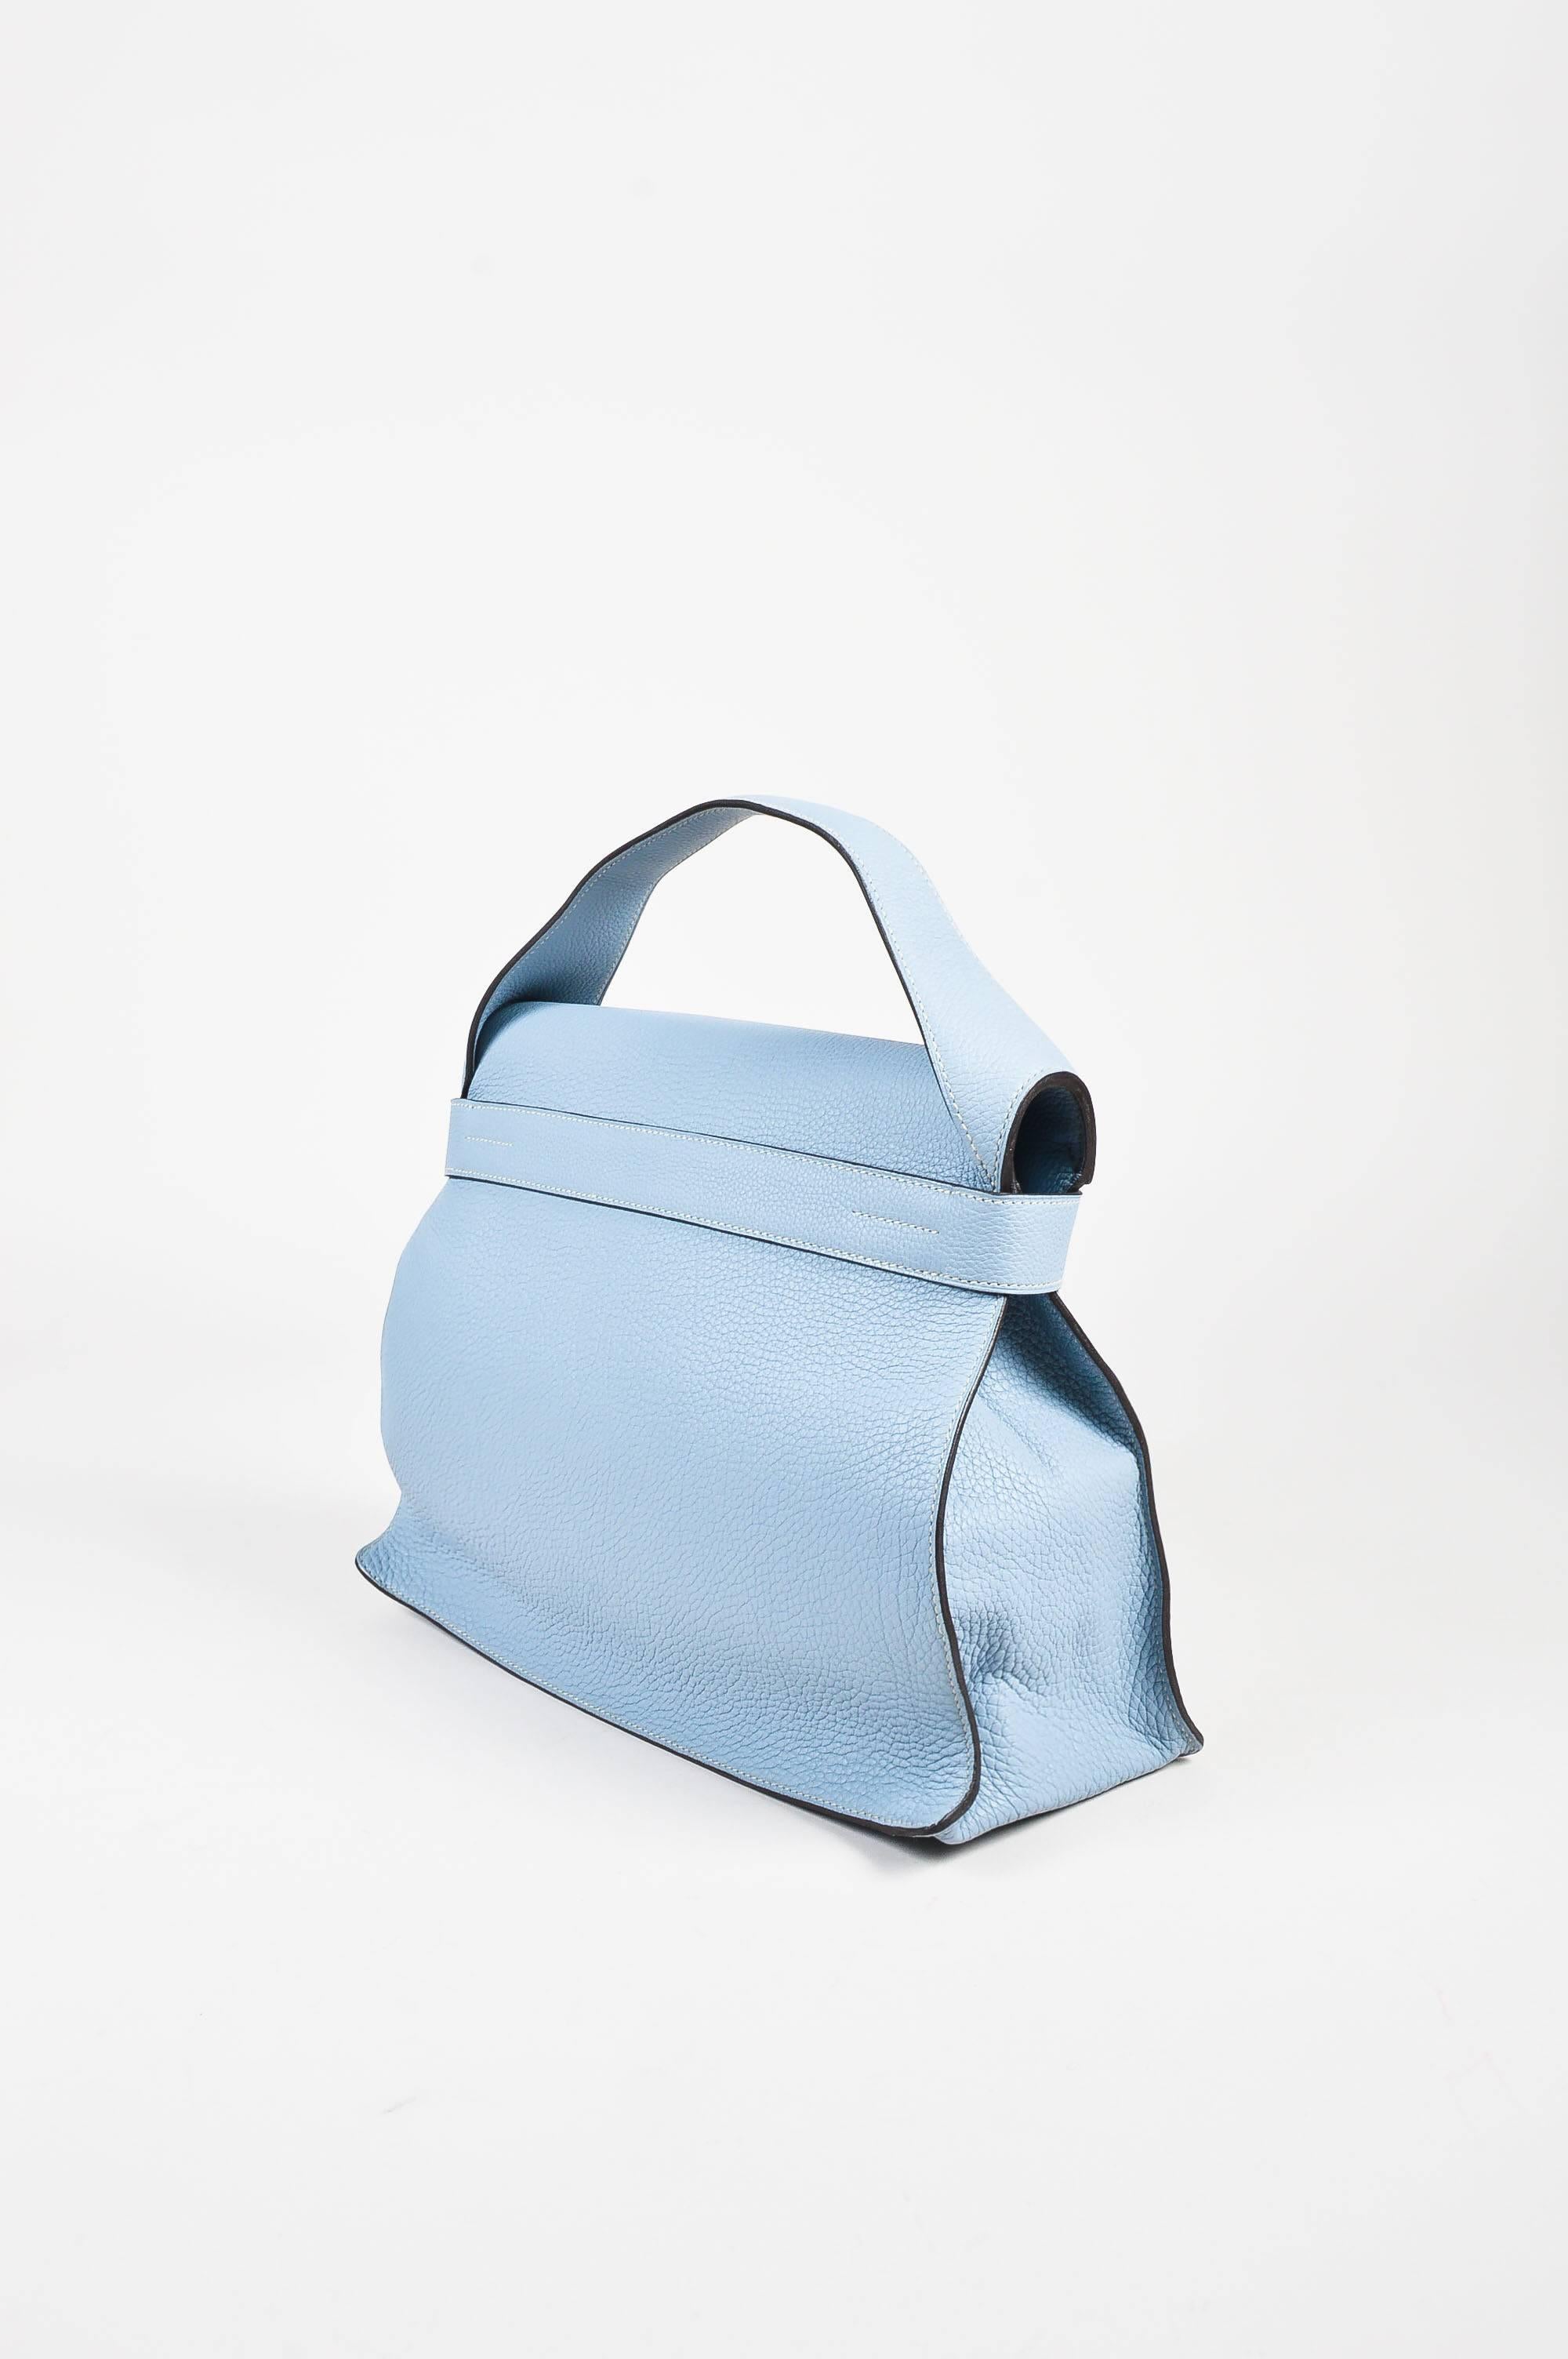 Retails at $7700. Circa 2012 this gorgeous "Etribelt" bag is constructed of blue Togo leather. Single top strap and front strap with palladium buckle closure.

Interior features: Flat pocket

Additional measurements: Handle Length